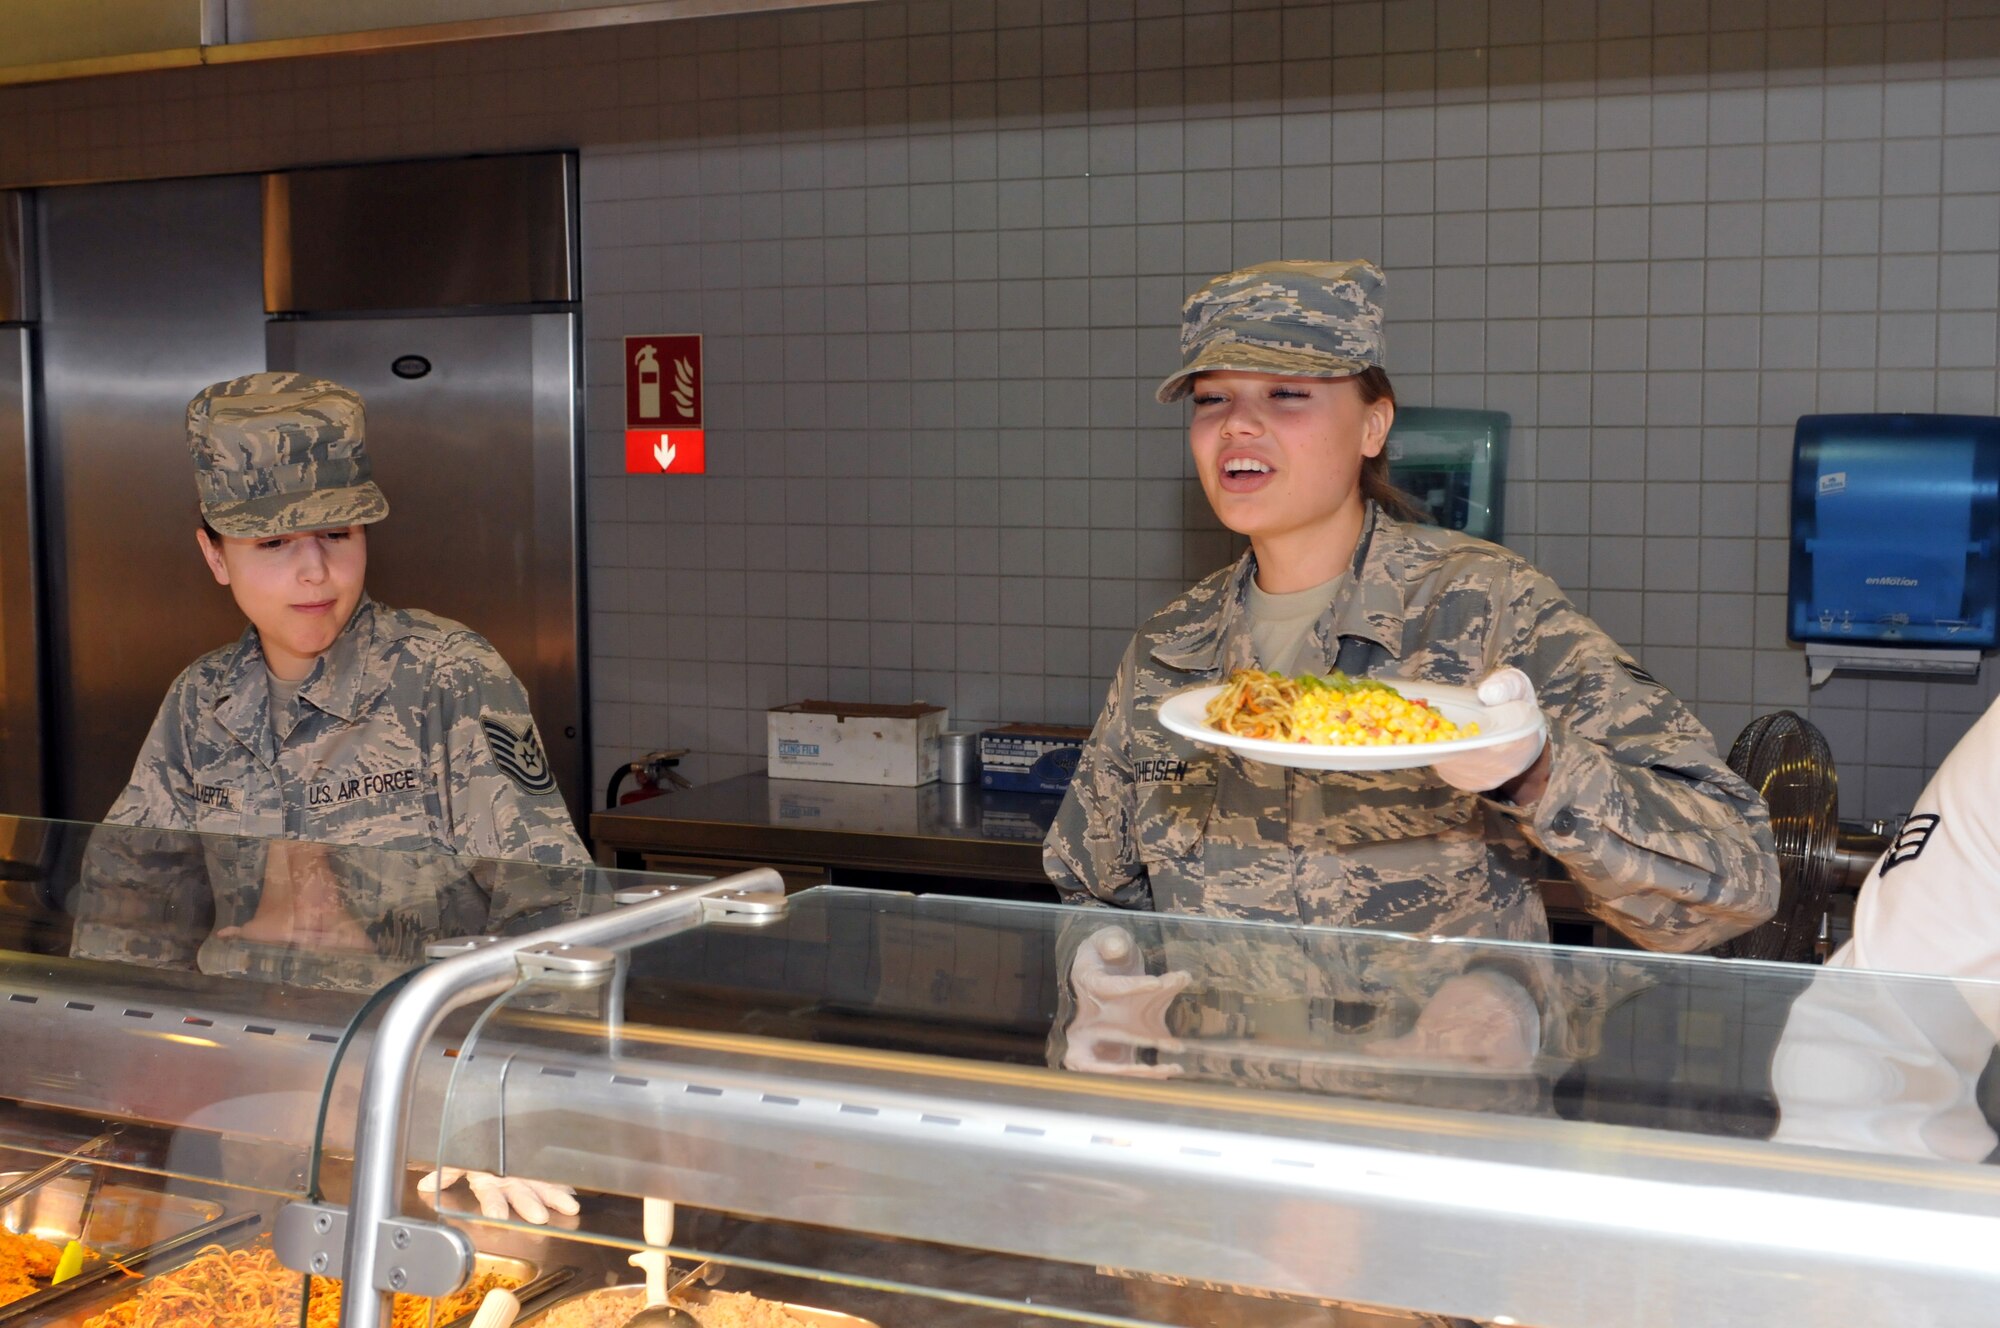 Airman 1st Class Mackenzie Theisen with the Iowa Air National Guard’s 185th Air Refueling Wing’s Force Support Squadron serves up some hot chow at Ramstein Air Base, Germany in June, 2018. Several members of the unit were in German for training alongside their active duty counterparts. U.S. Air National Guard photo by Master Sgt. Bill Wiseman.